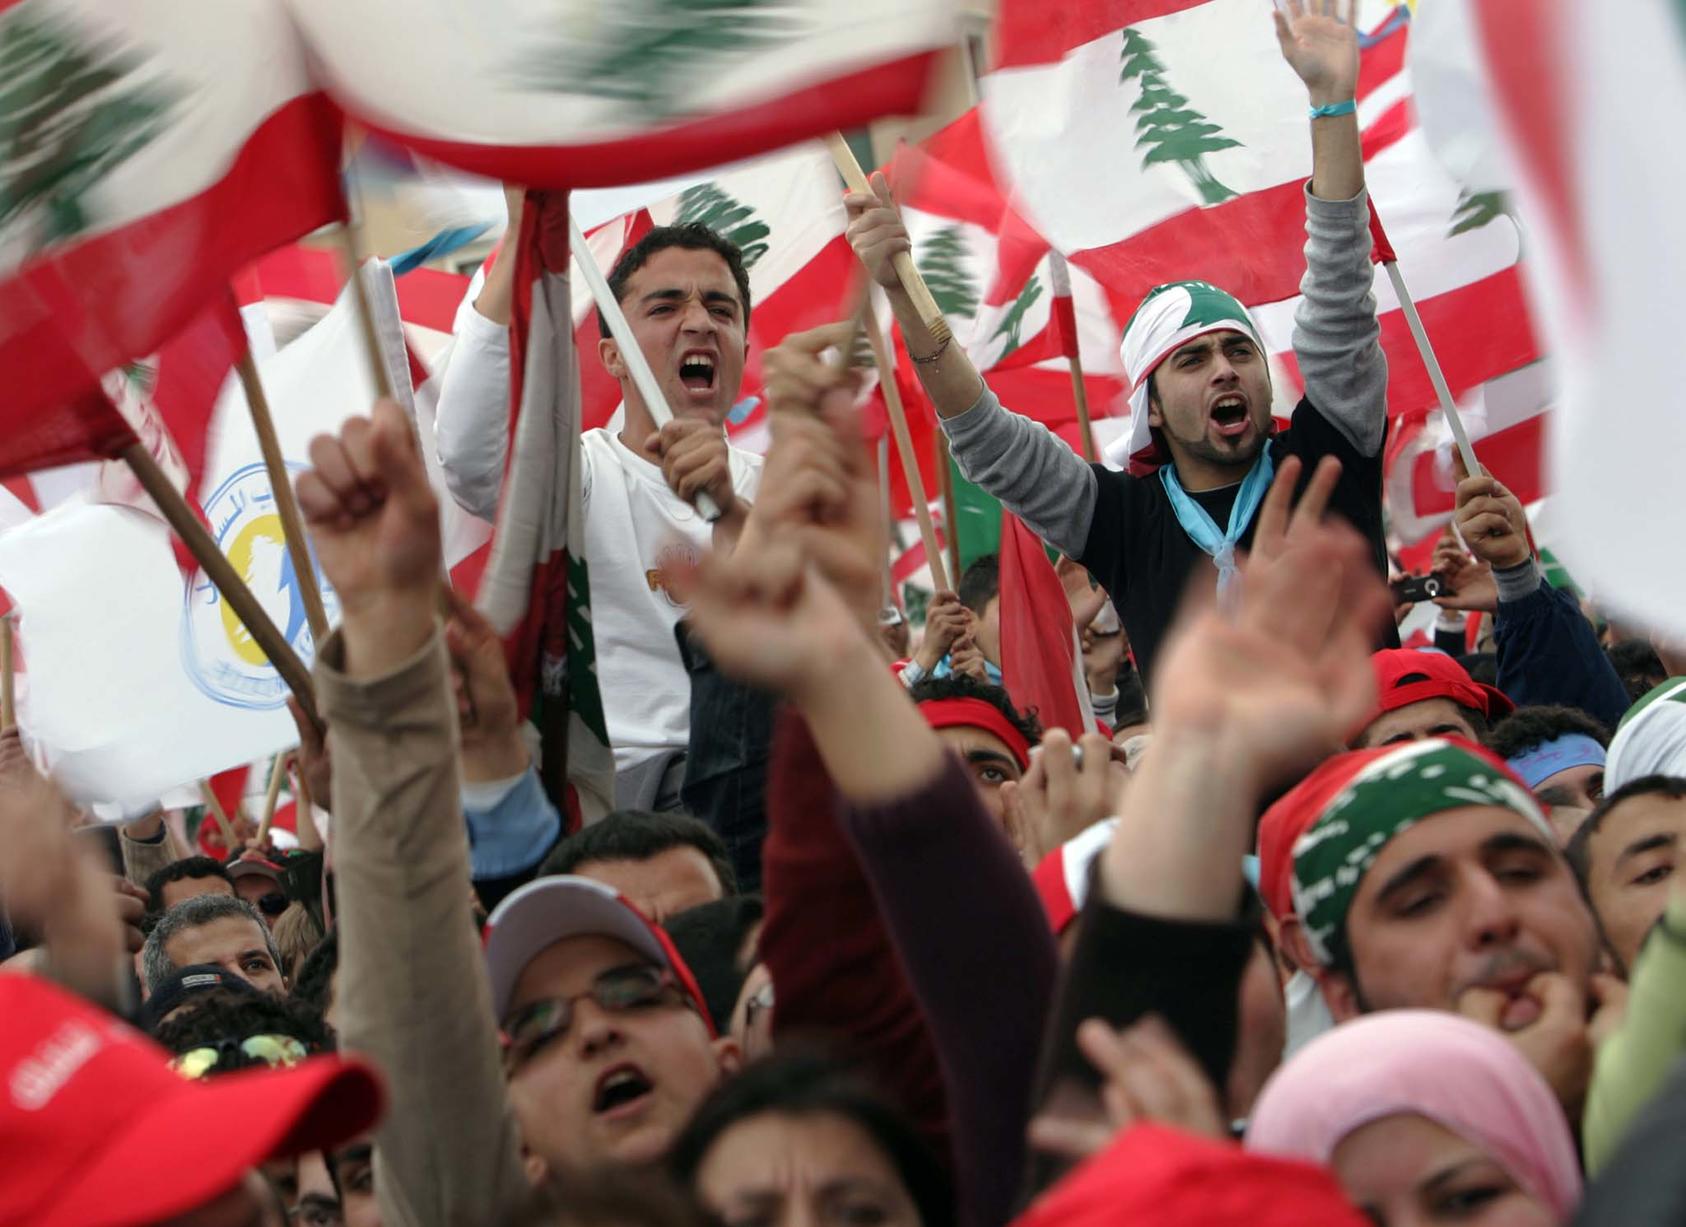 Demonstrators wave the flag of Lebanon during a rally in Beirut. (Shawn Baldwin/The New York Times)